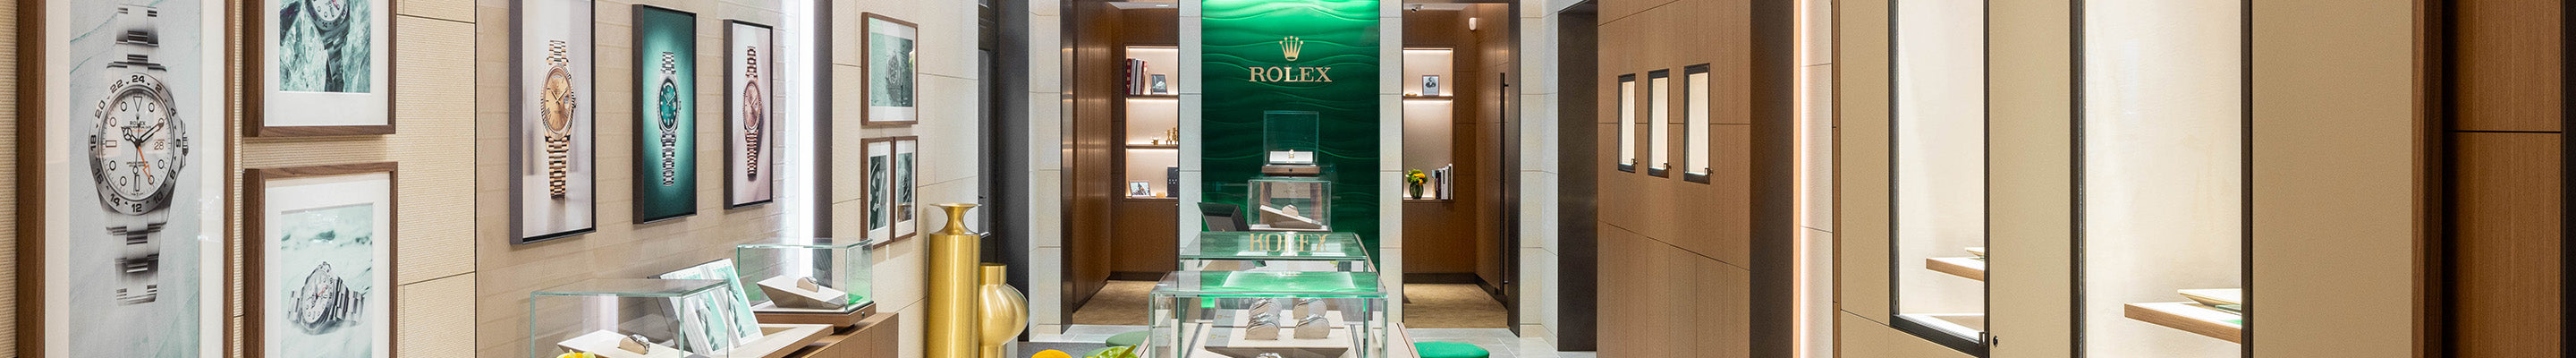 Rolex banner rolex our showrooms